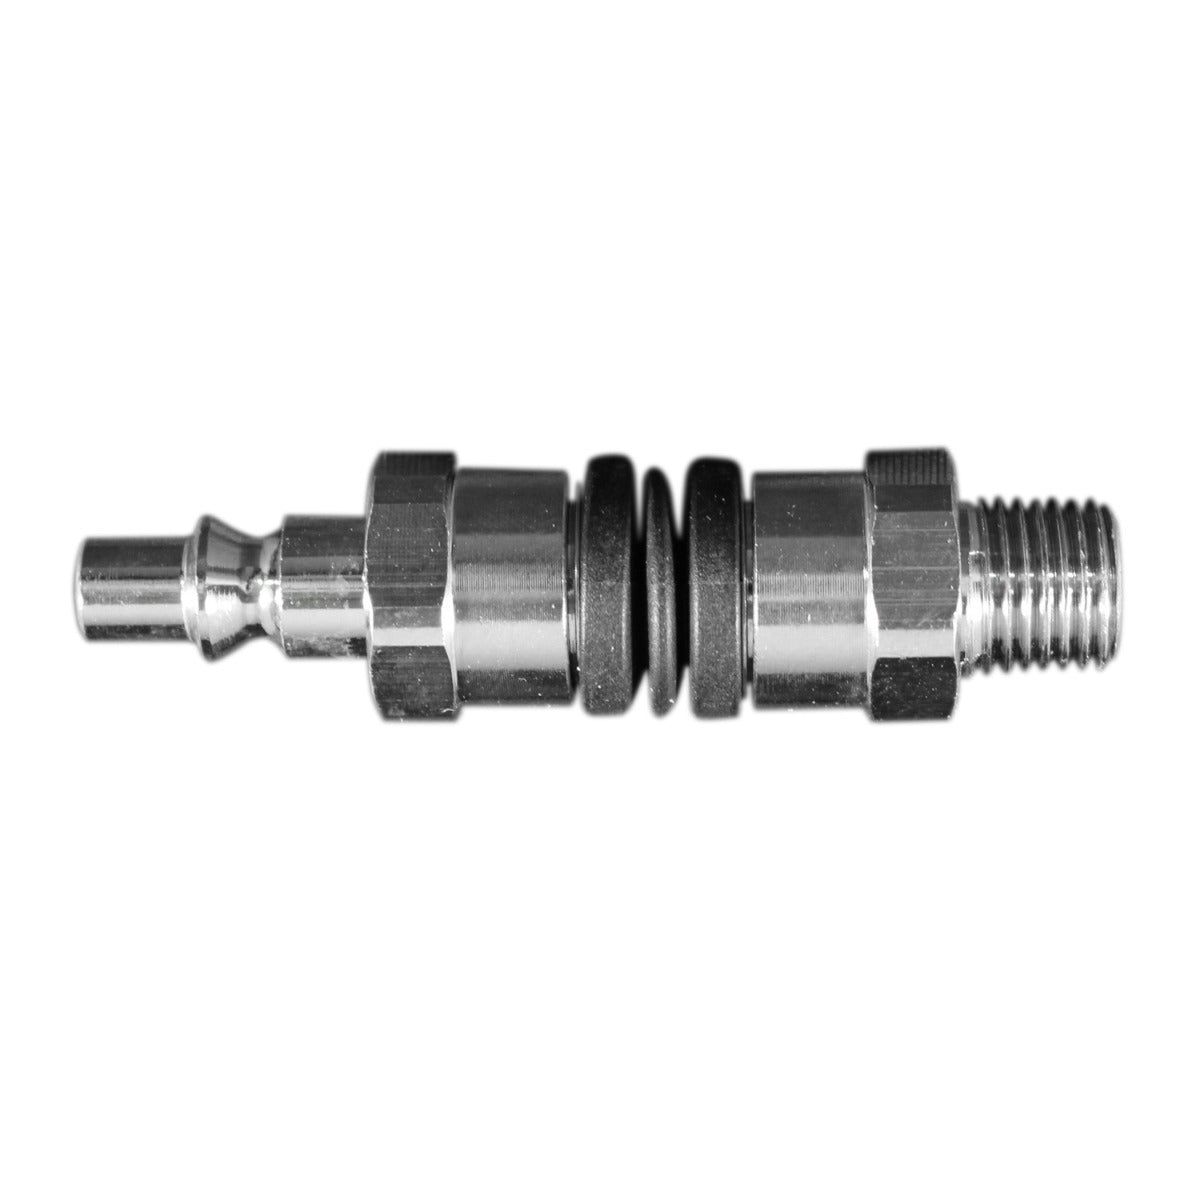 Variable Angle Swivel Fitting